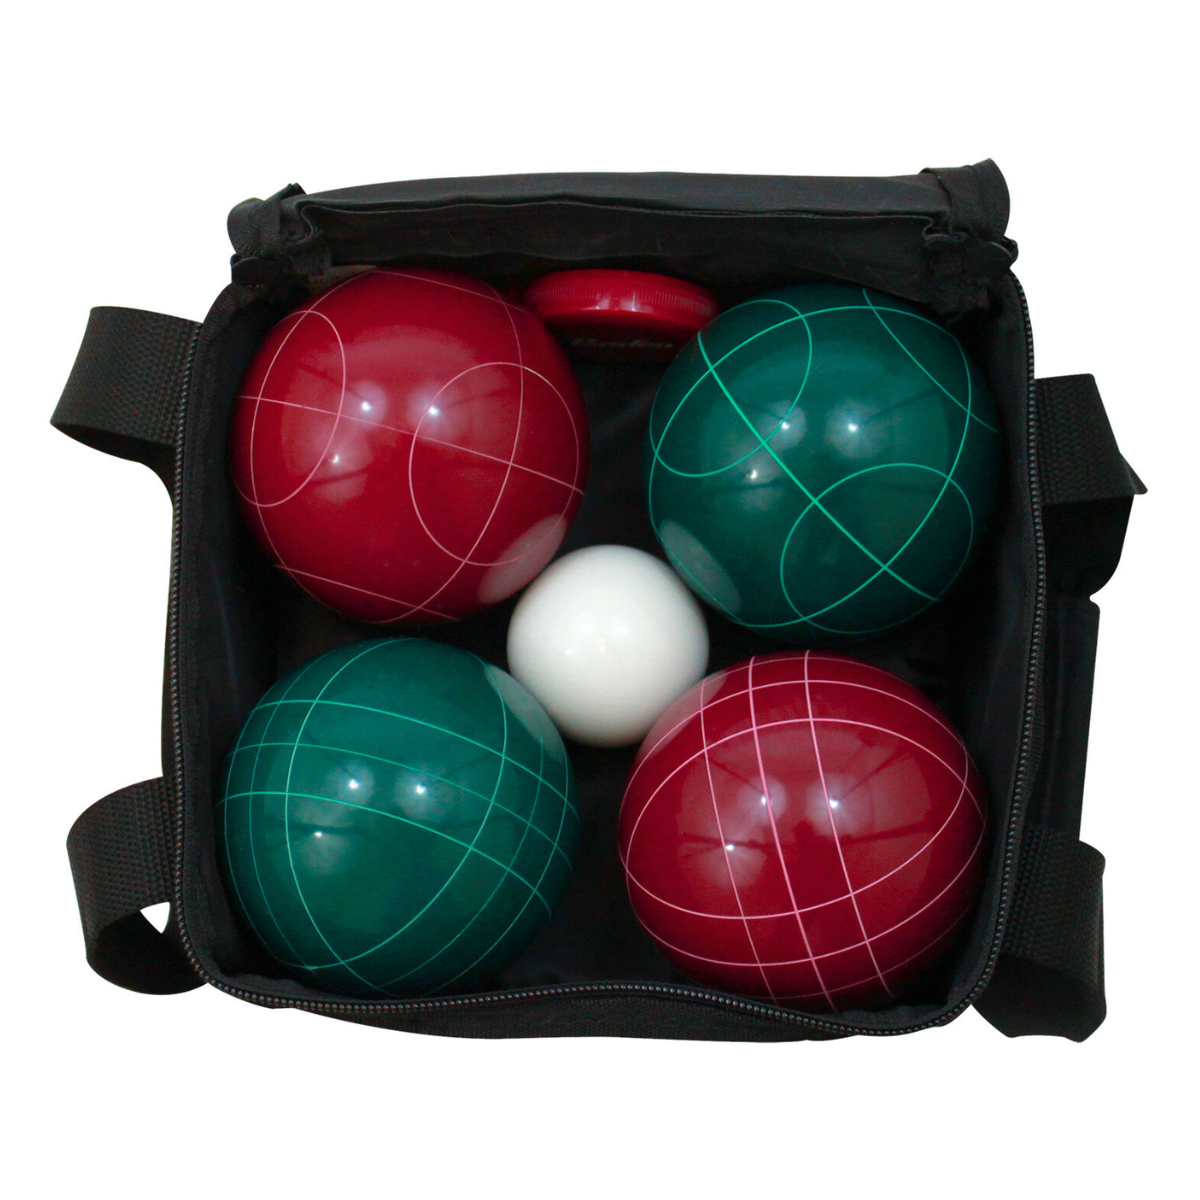 The Baden Champions Bocce Set